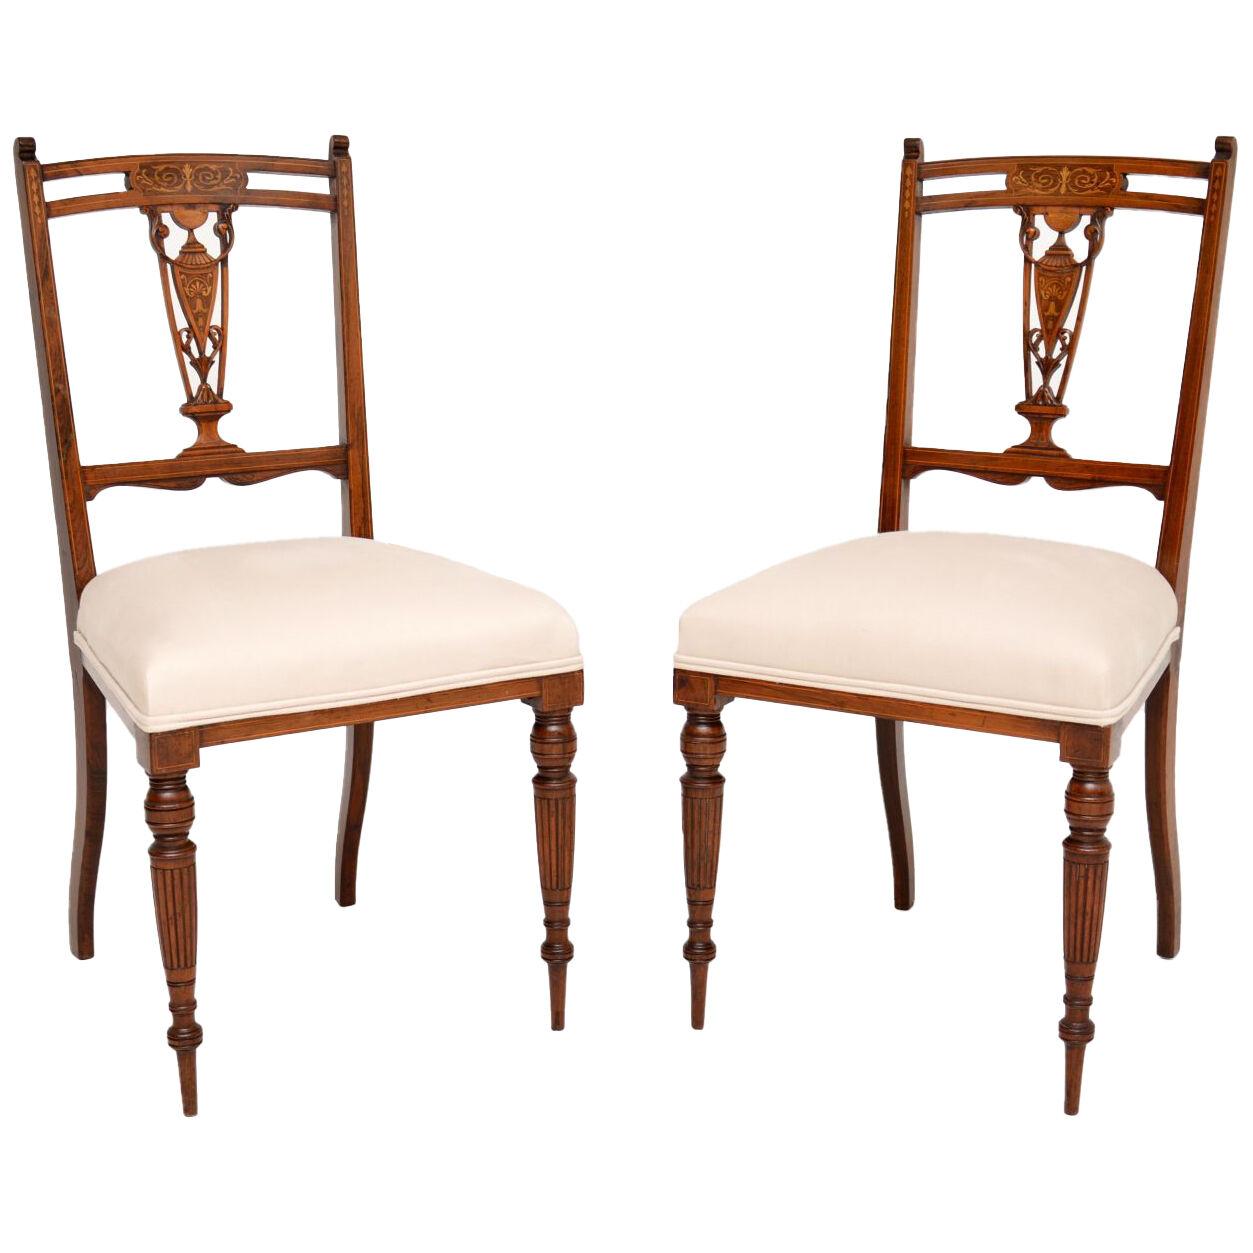 Pair of Antique Victorian Inlaid Rosewood Side Chairs